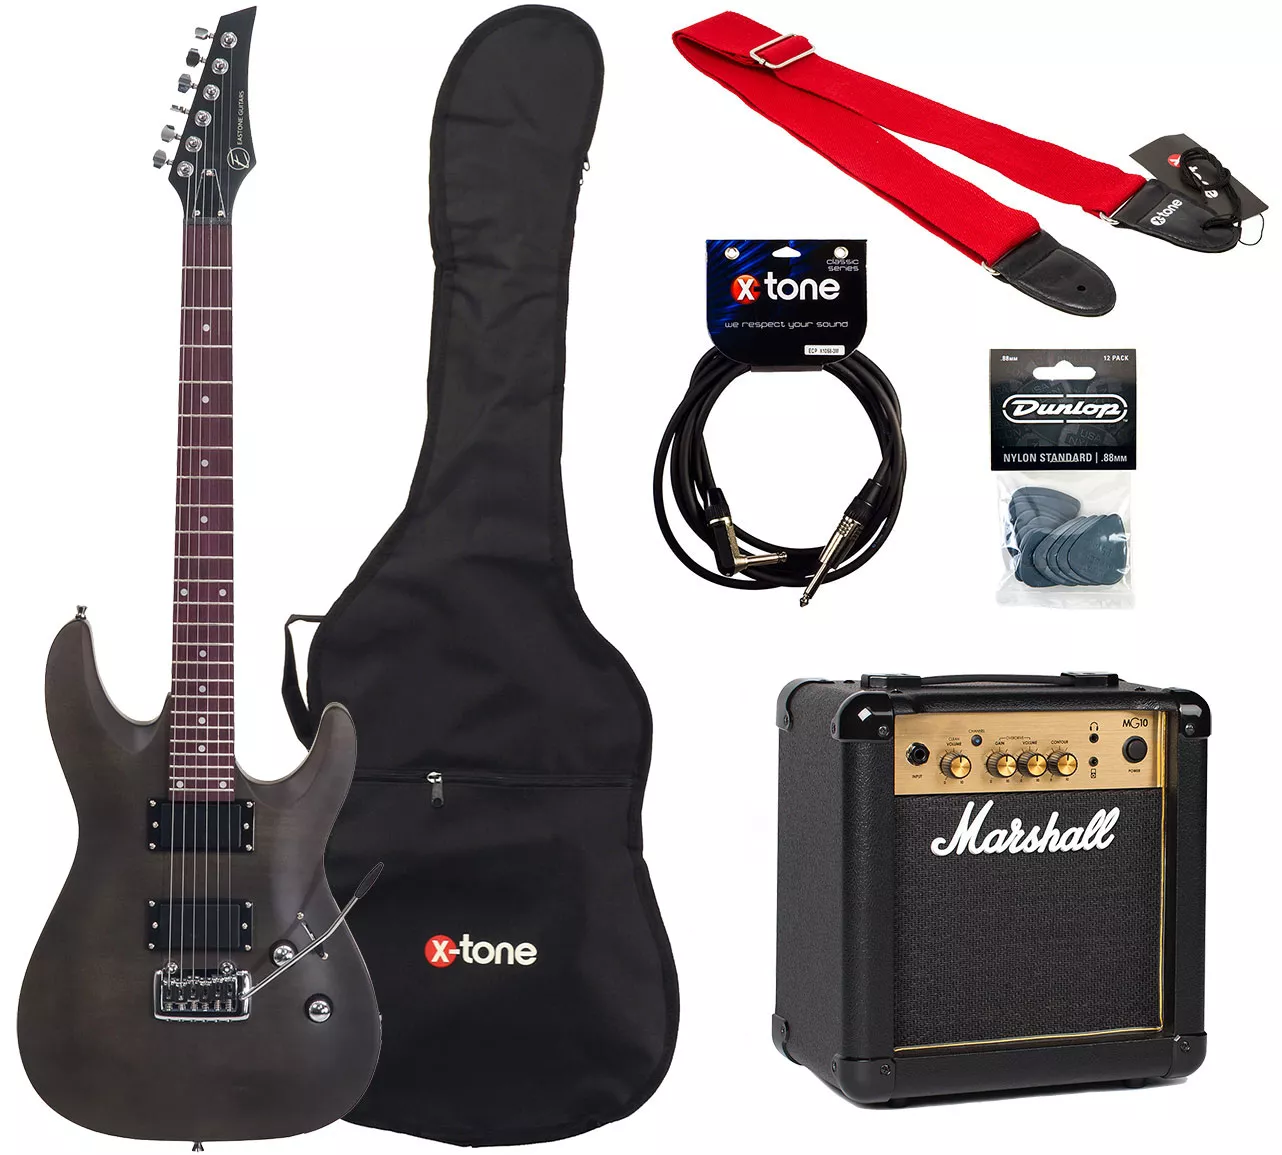 METDC +MARSHALL MG10 +COURROIE +HOUSSE +CABLE +MEDIATORS - black